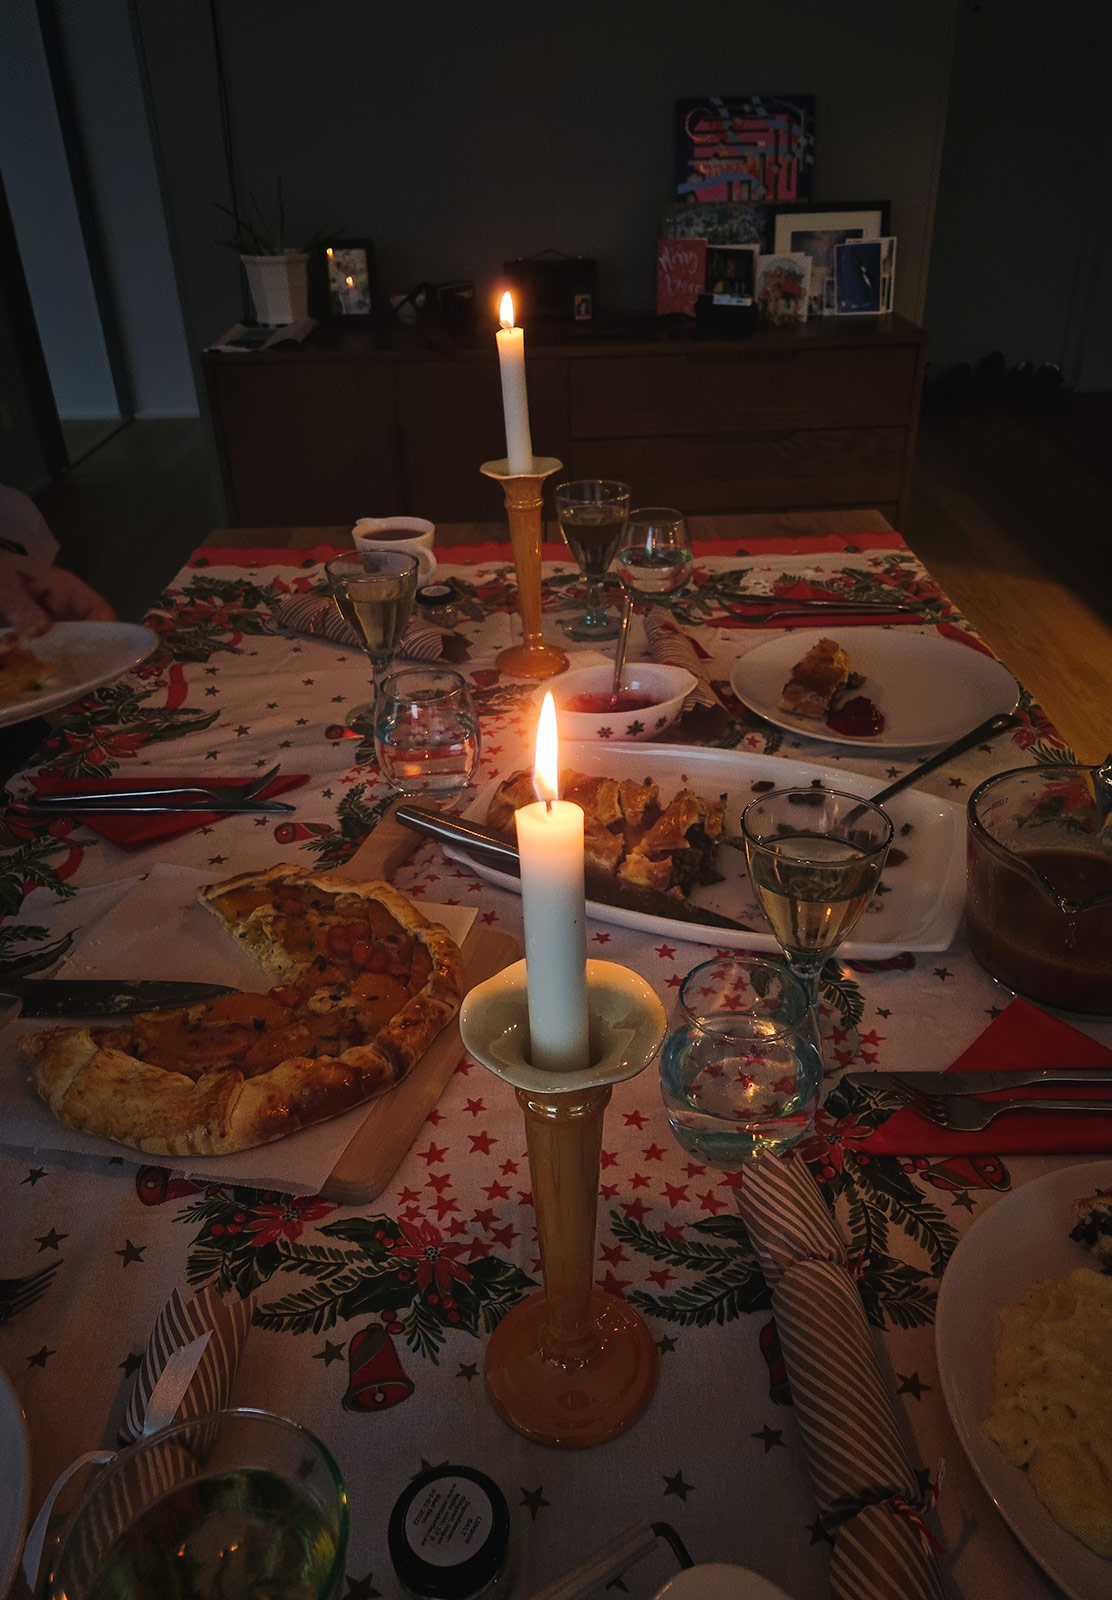 Food and candles on table